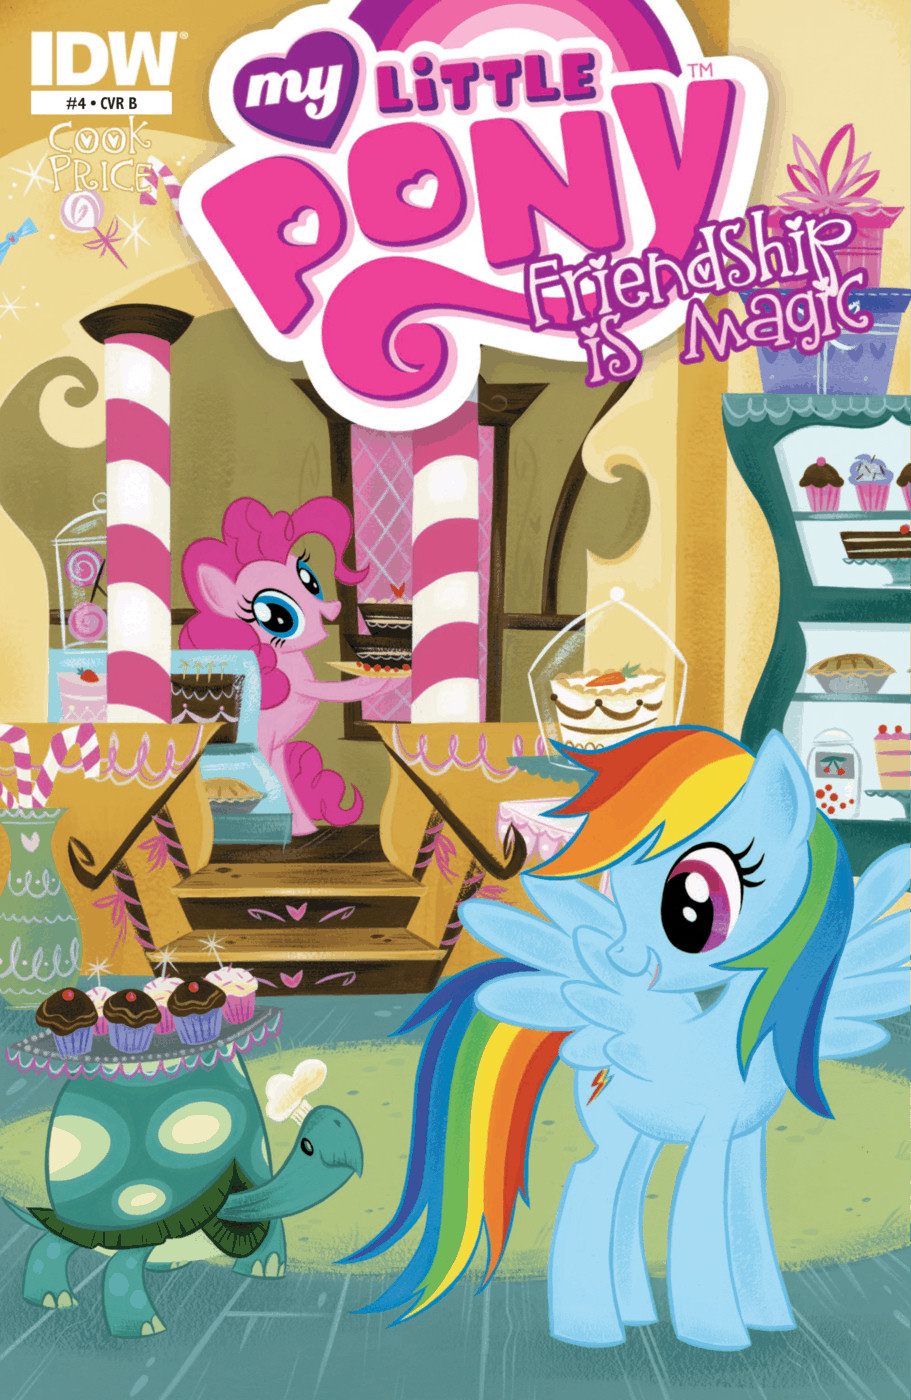 Read online My Little Pony: Friendship is Magic comic -  Issue #4 - 2